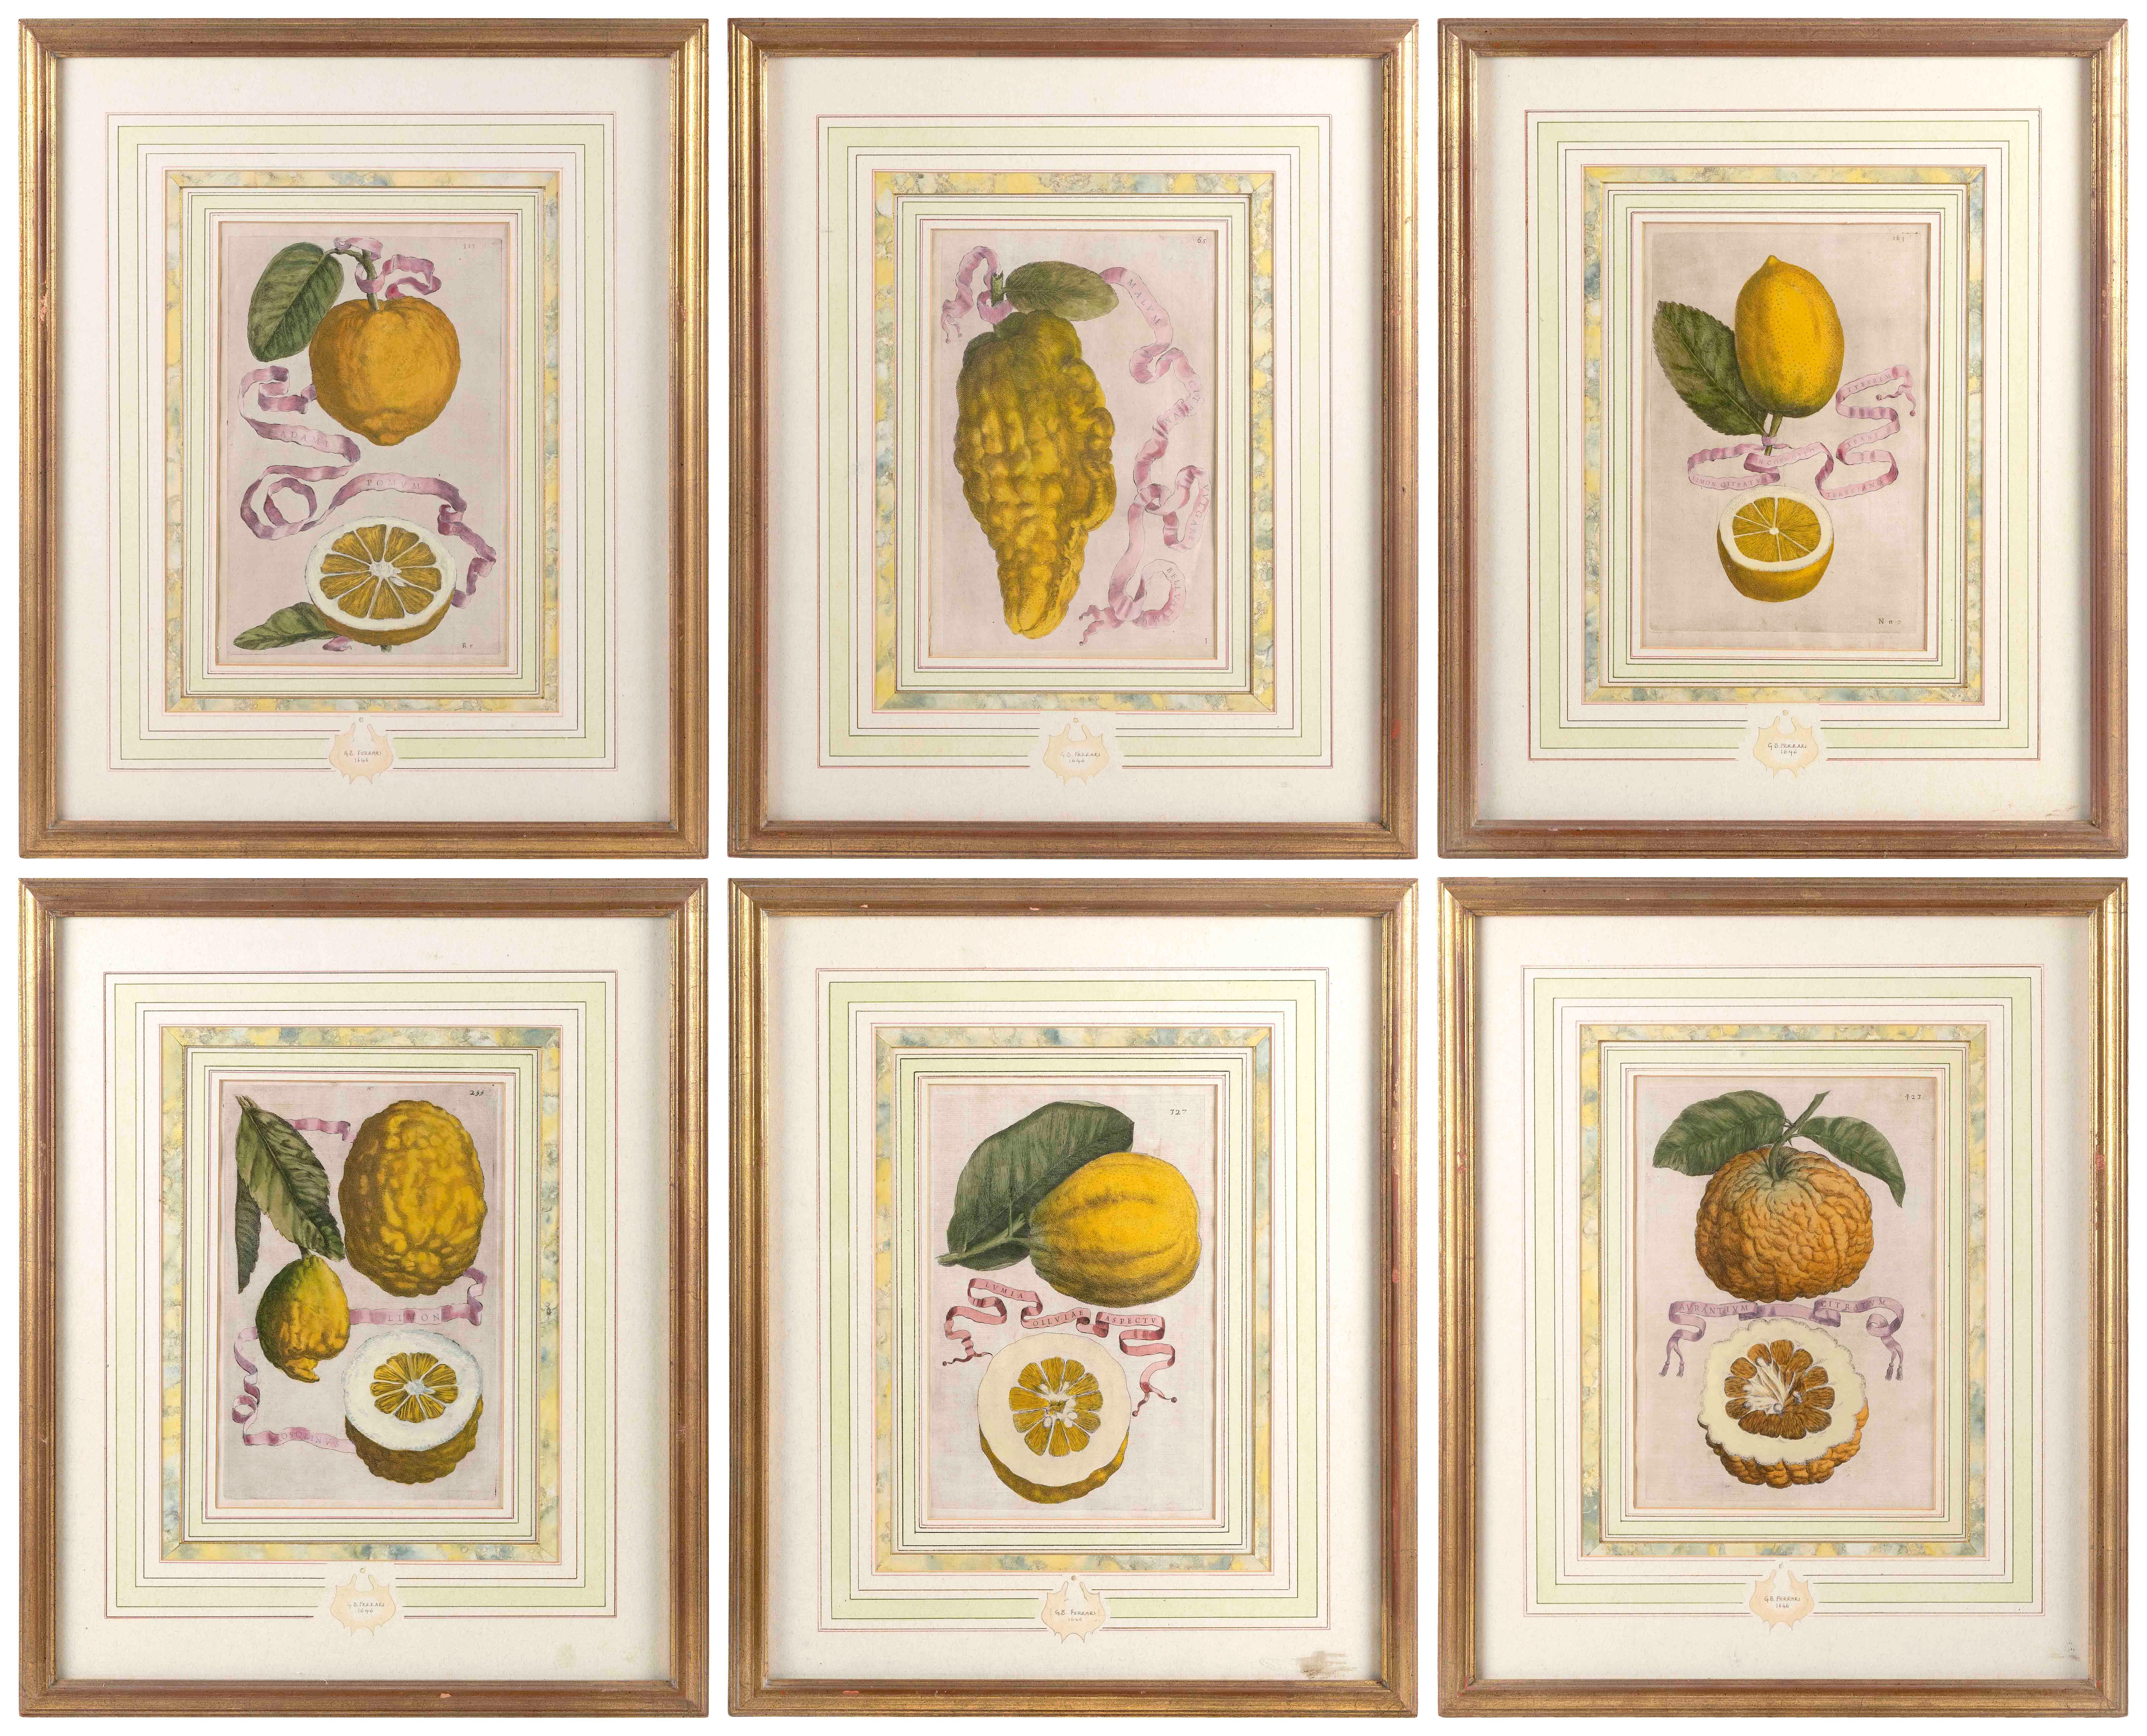 Six hand-colored engravings of fruit. by Giovanni Battista Ferrari